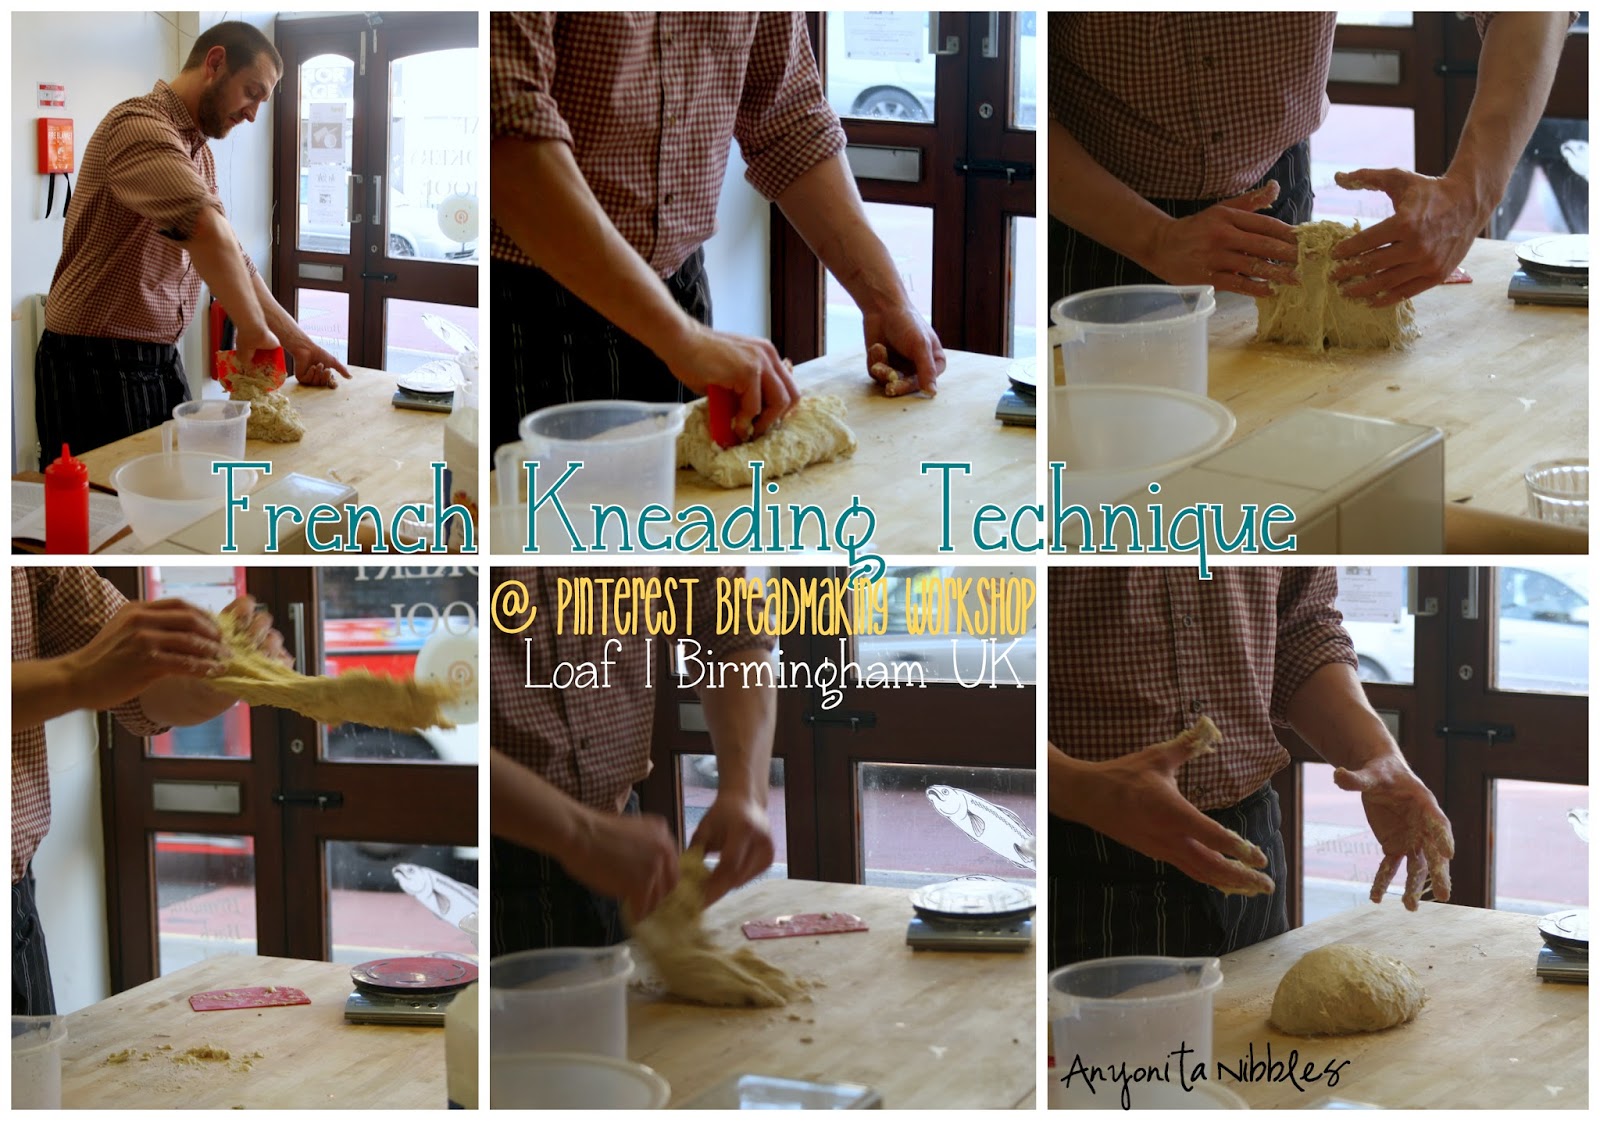 Andy from Loaf demonstrates a French kneading technique